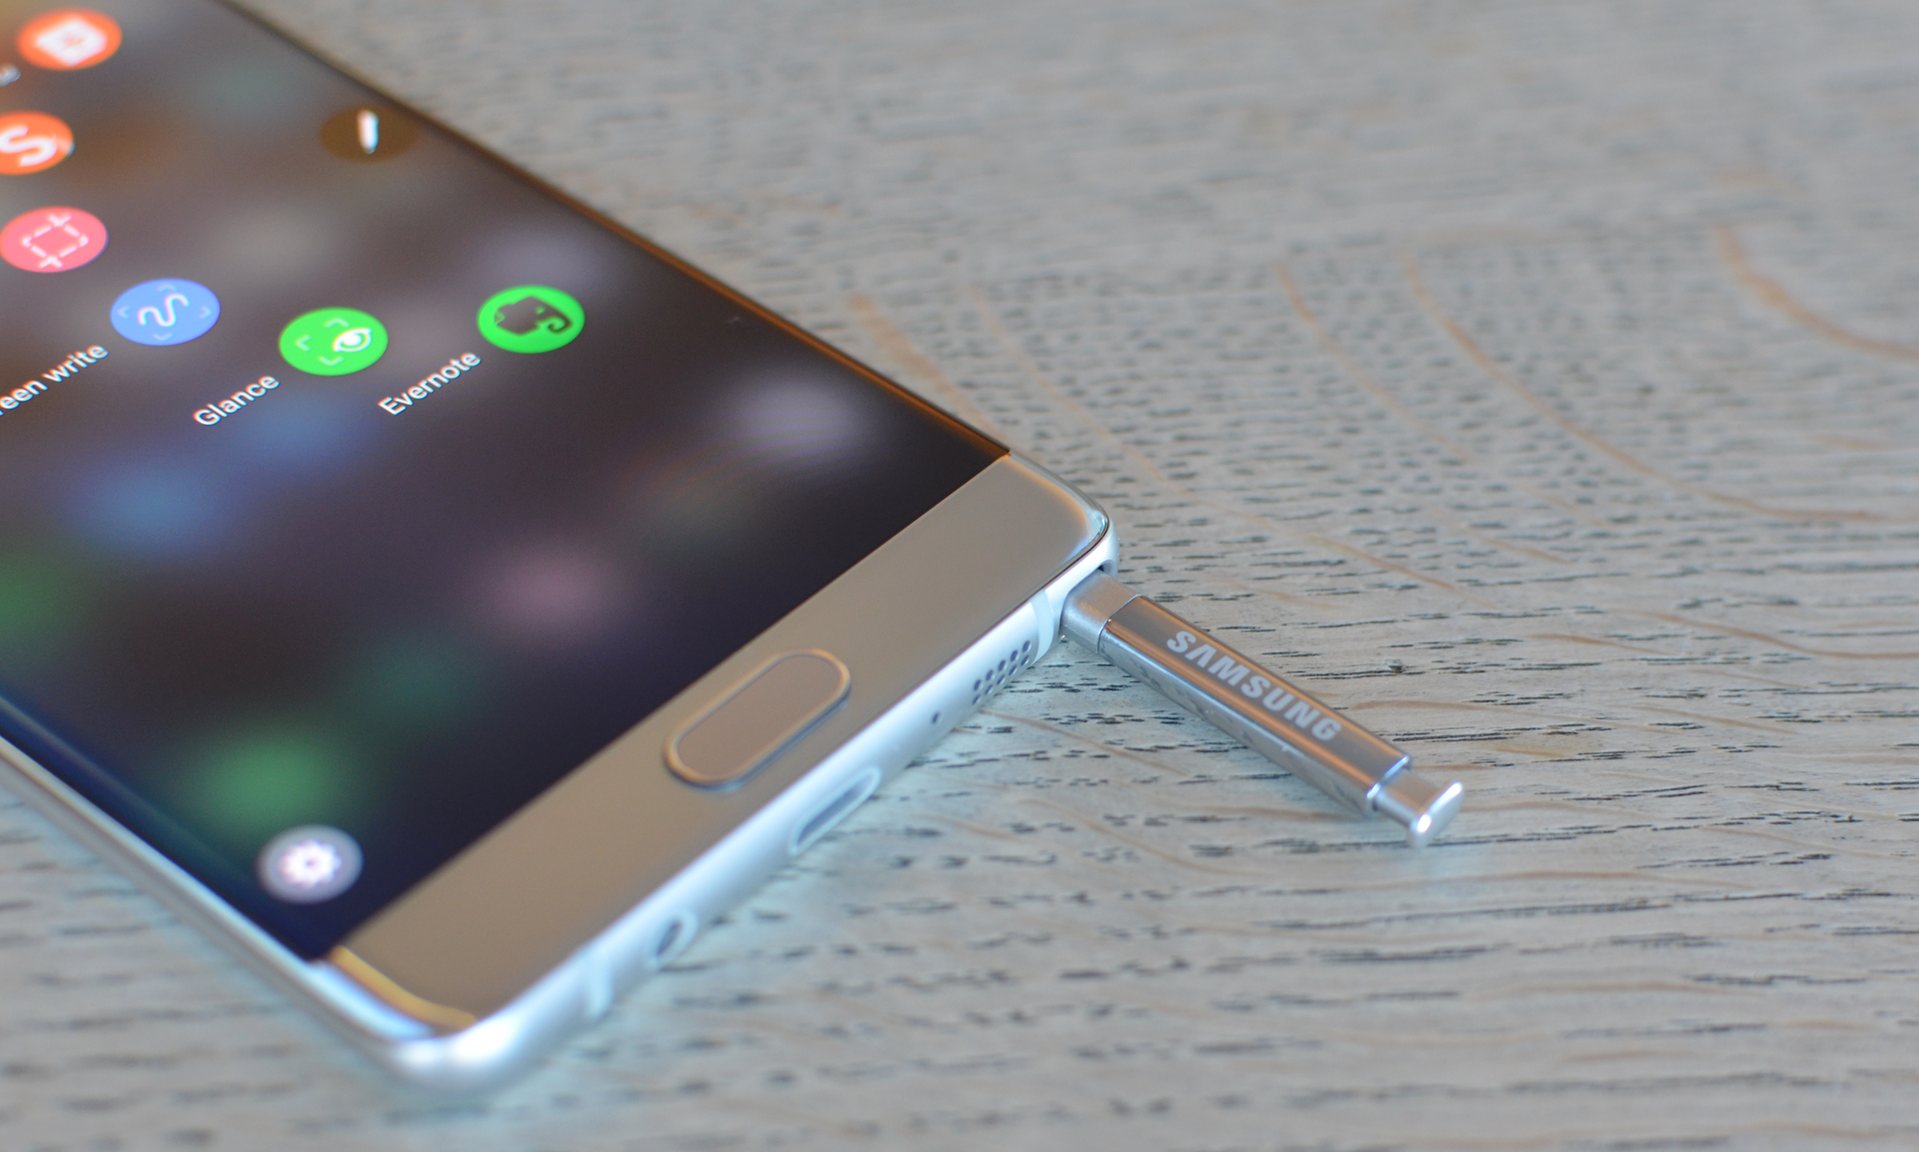 The S Pen slots into the bottom of the phone with a push-button click.